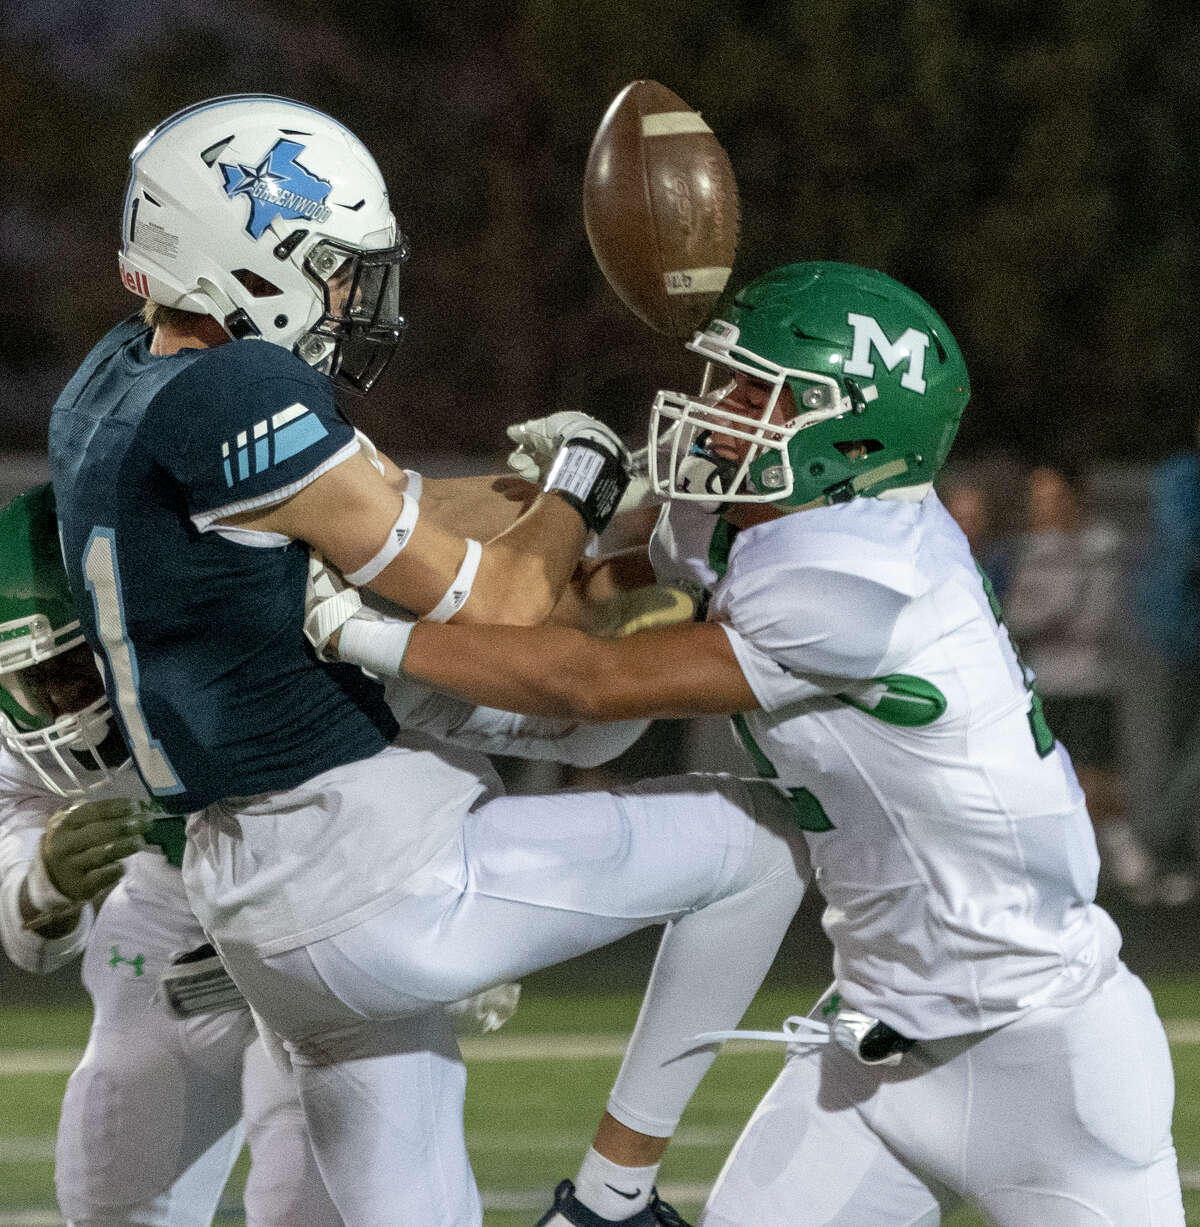 Greenwood's Brody Ray can't hang on to a reception as Monahans' Bradden Kesey defends 11/01/19 at J.M. King Memorial Stadium. Tim Fischer/Reporter-Telegram